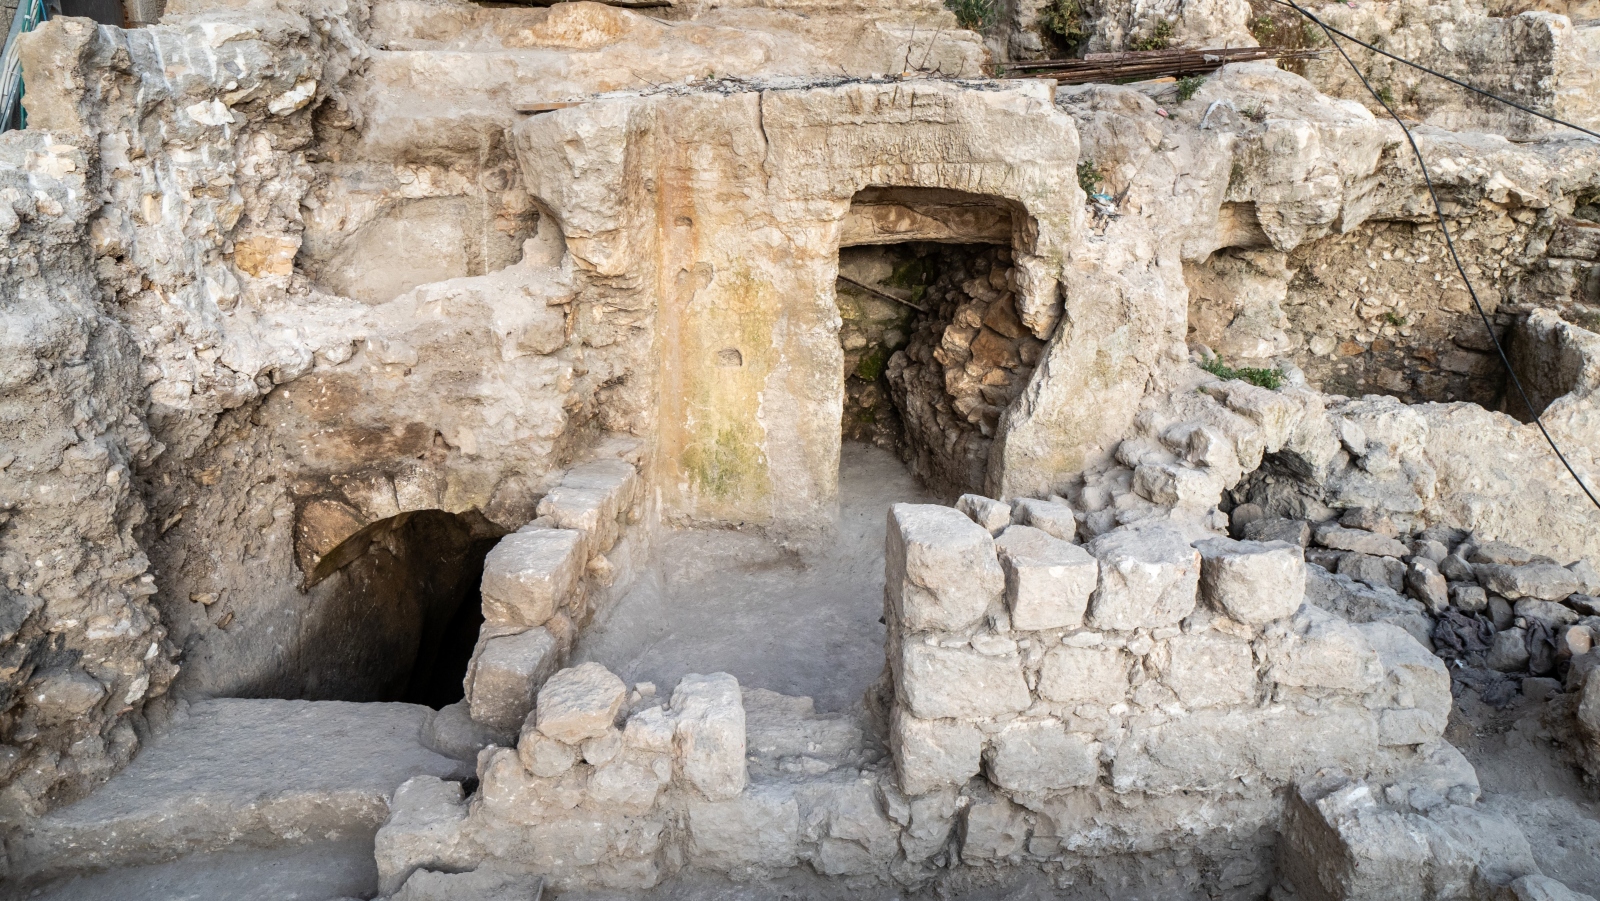 View of the ritual bath (left) and surrounding remains of Herodian-period structures. Photo by Assaf Peretz/Israel Antiquities Authority